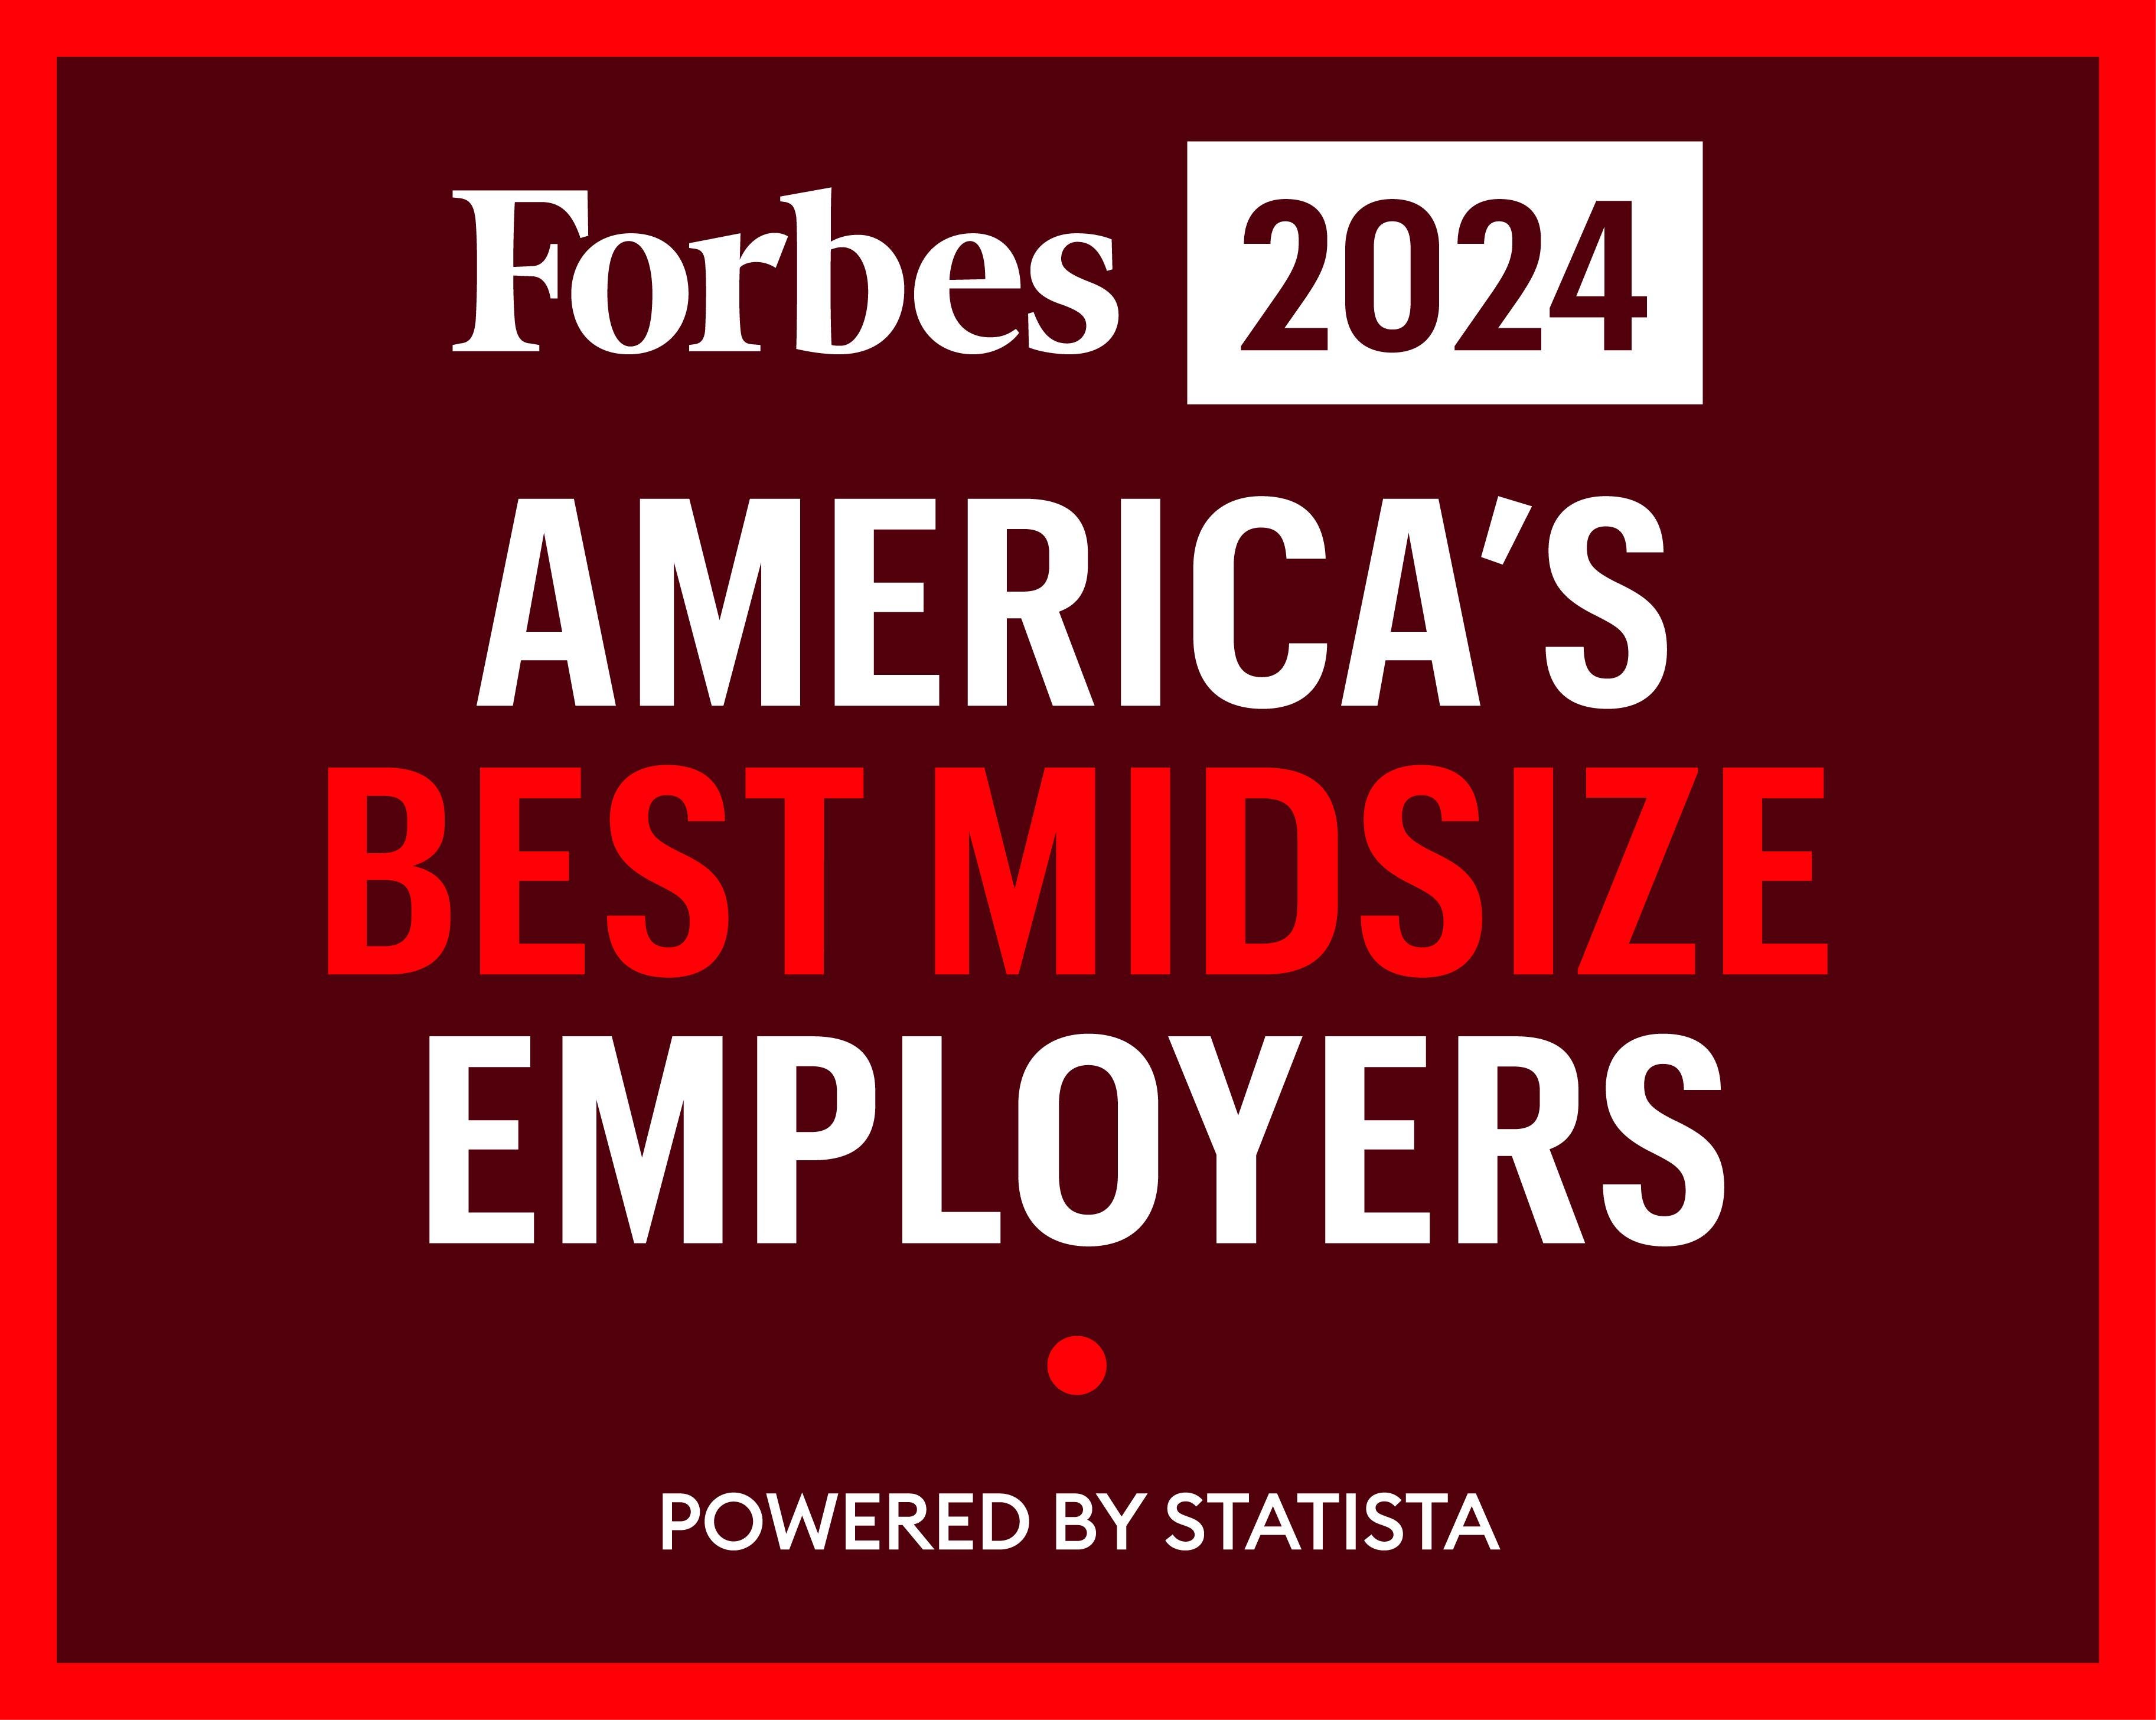 Forbes 2024 America's Best Midsize Employers